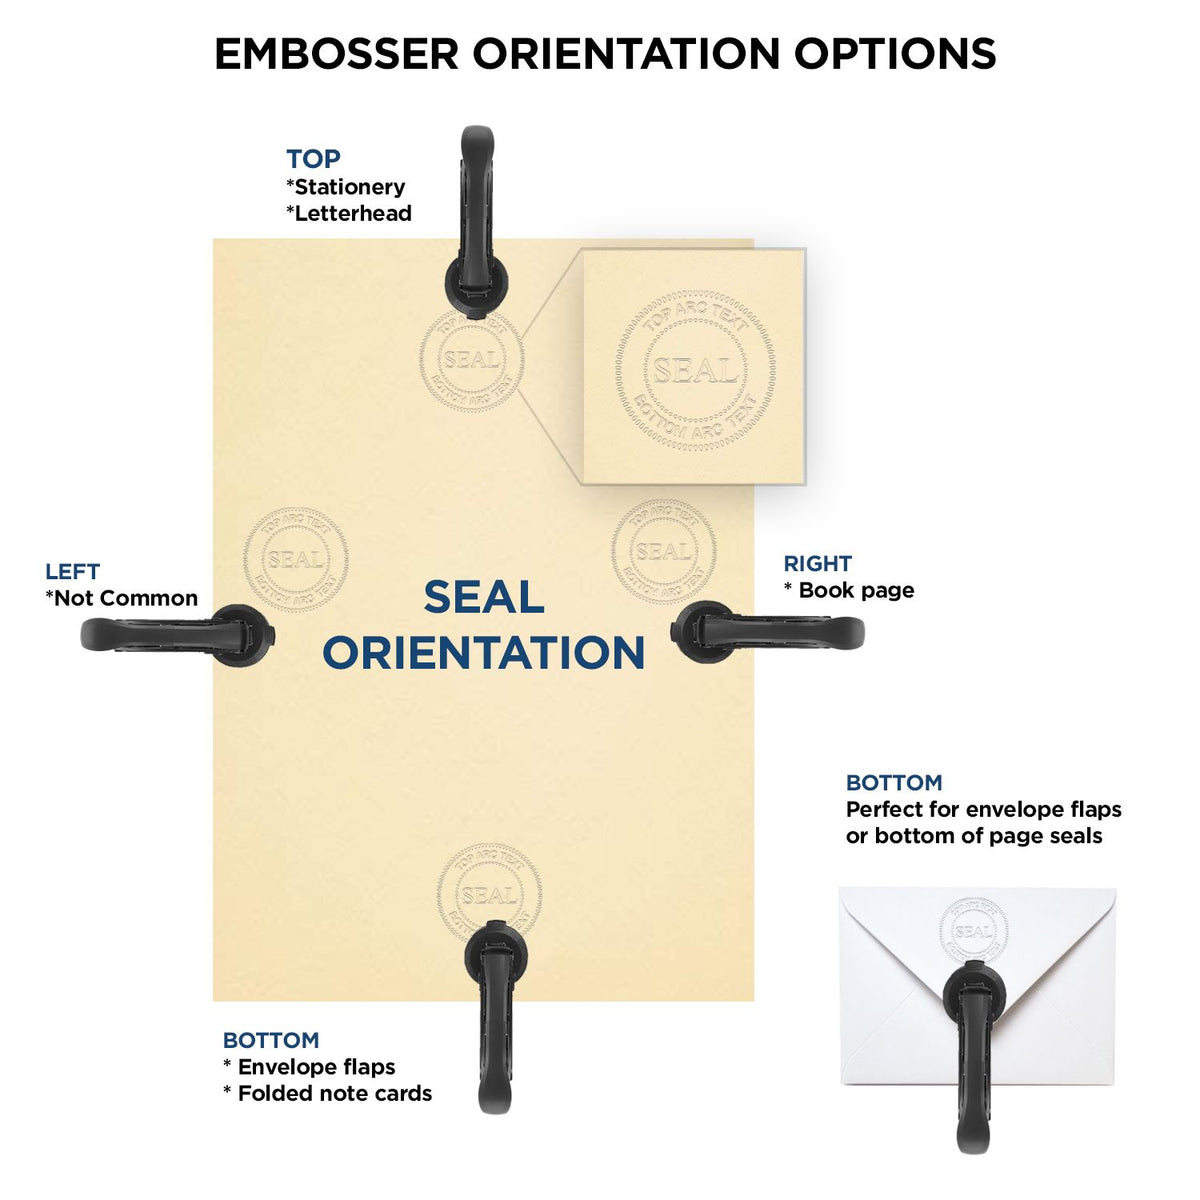 An infographic for the Heavy Duty Cast Iron Illinois Geologist Seal Embosser showing embosser orientation, this is showing examples of a top, bottom, right and left insert.